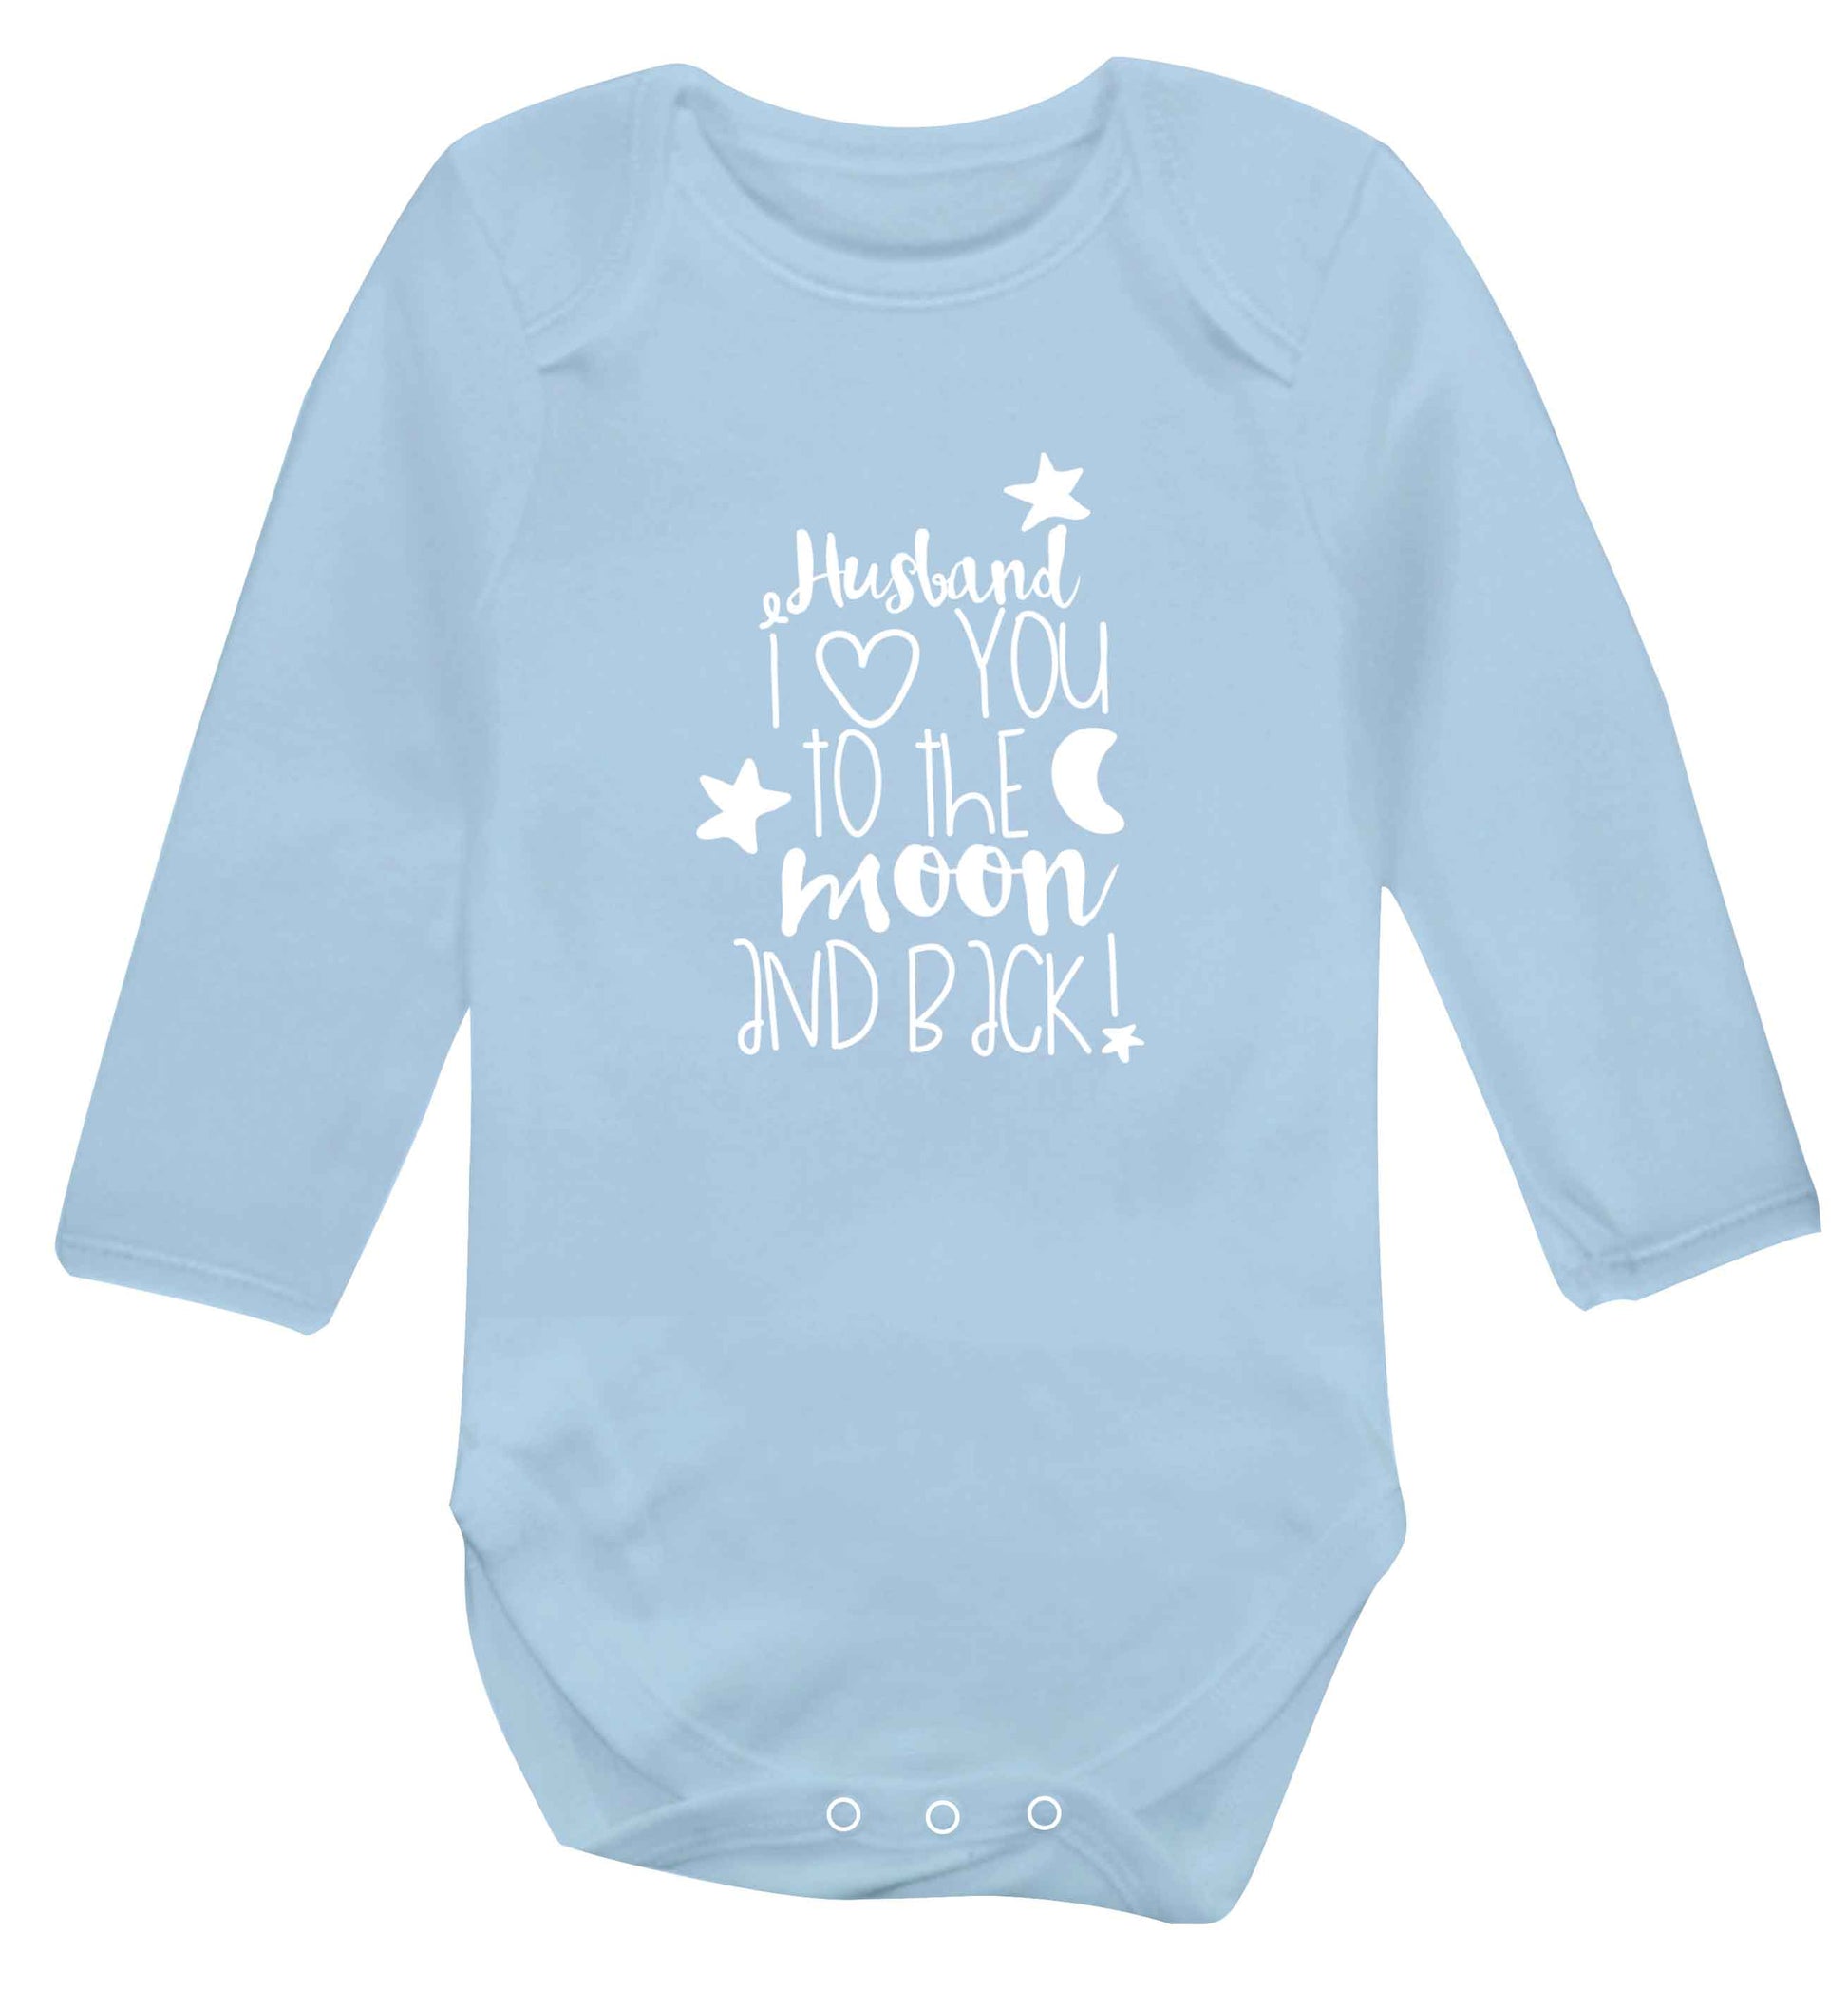 Husband I love you to the moon and back baby vest long sleeved pale blue 6-12 months